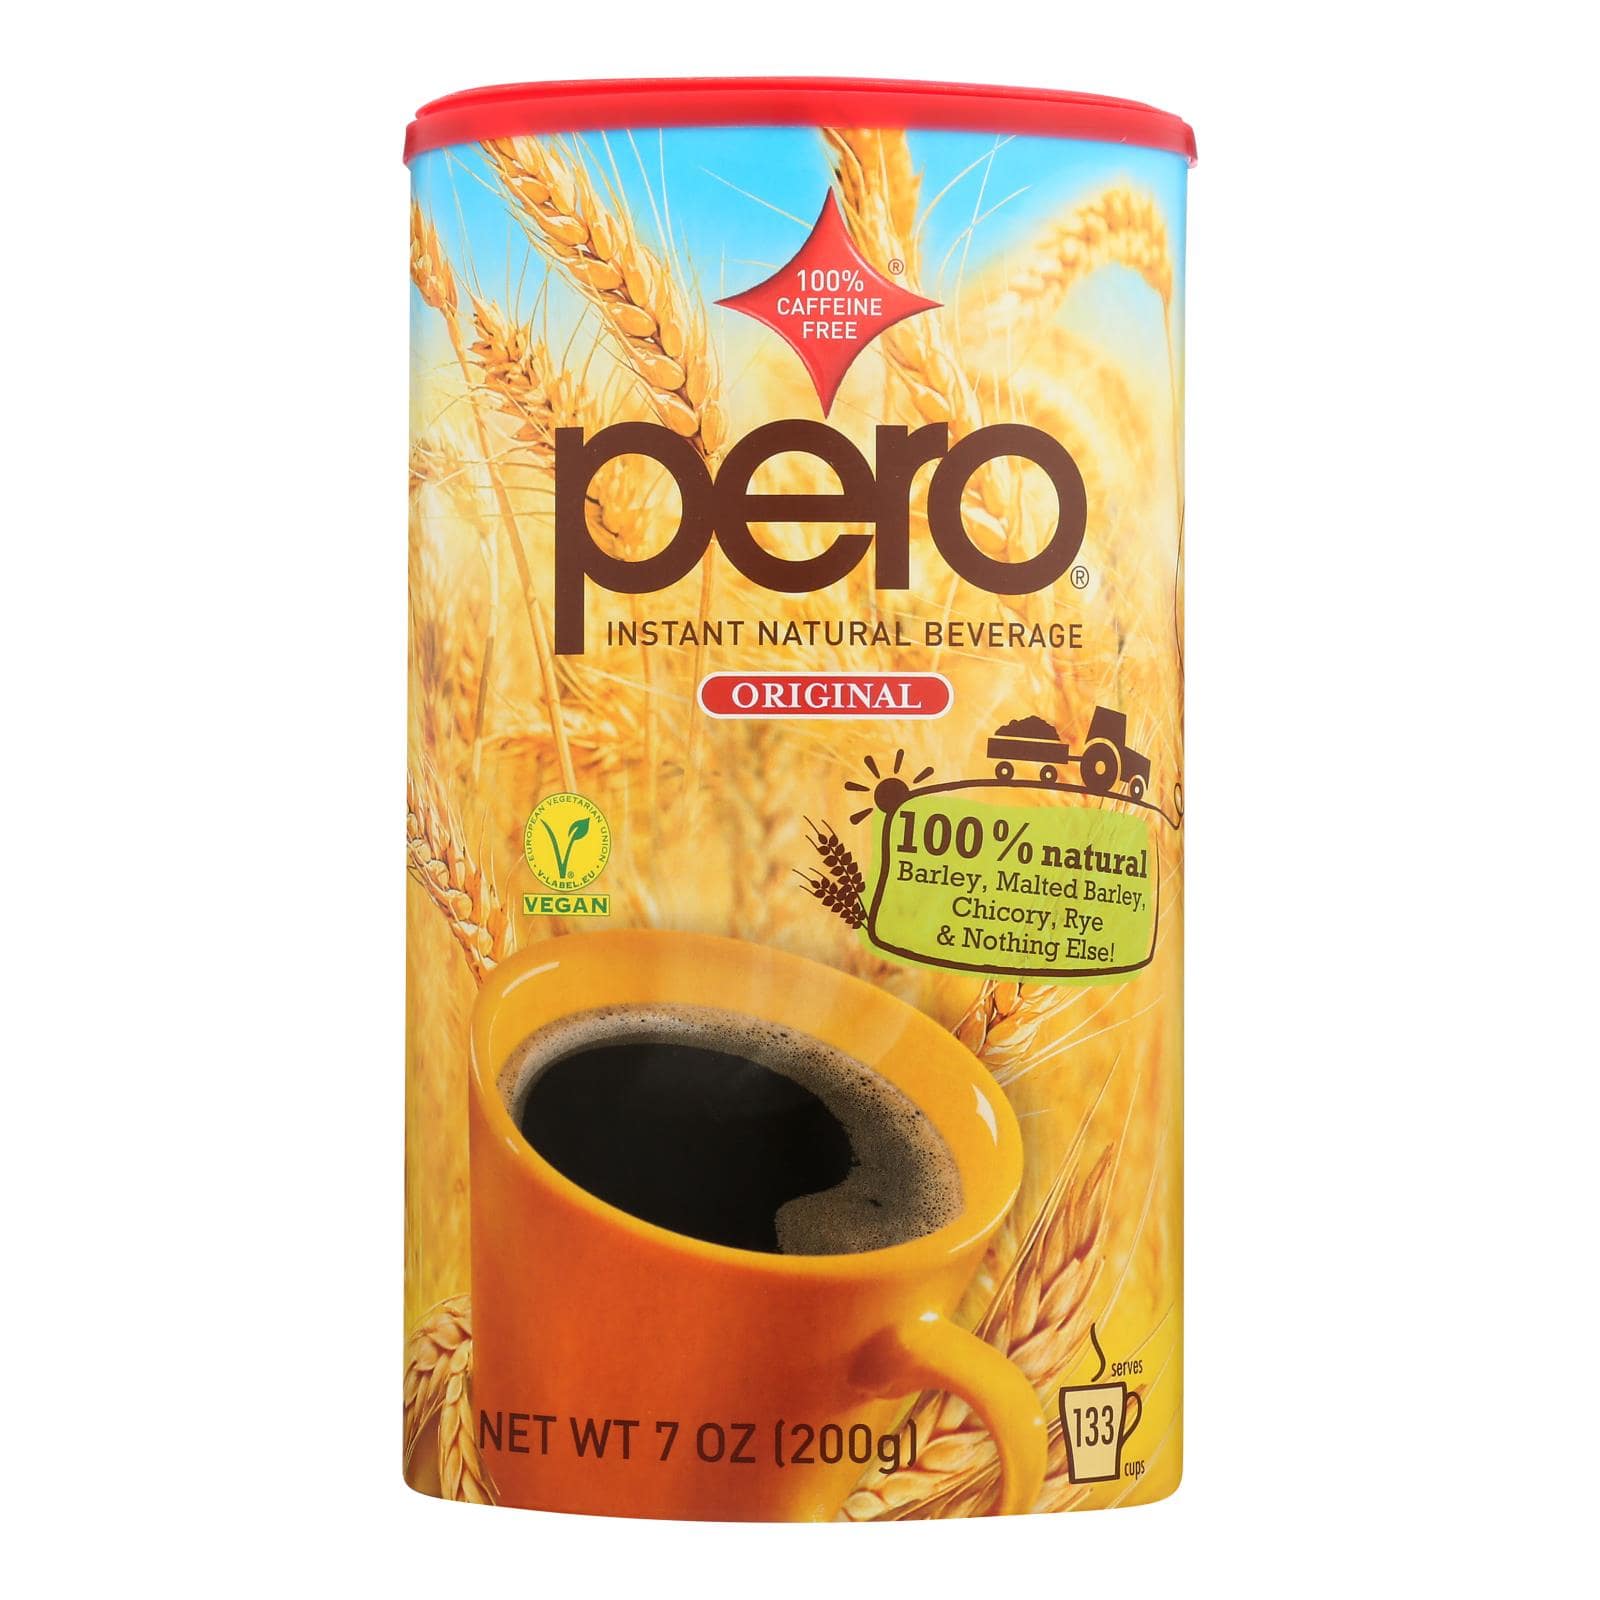 Buy Pero Instant Natural Beverage - Case Of 6 - 7 Oz.  at OnlyNaturals.us